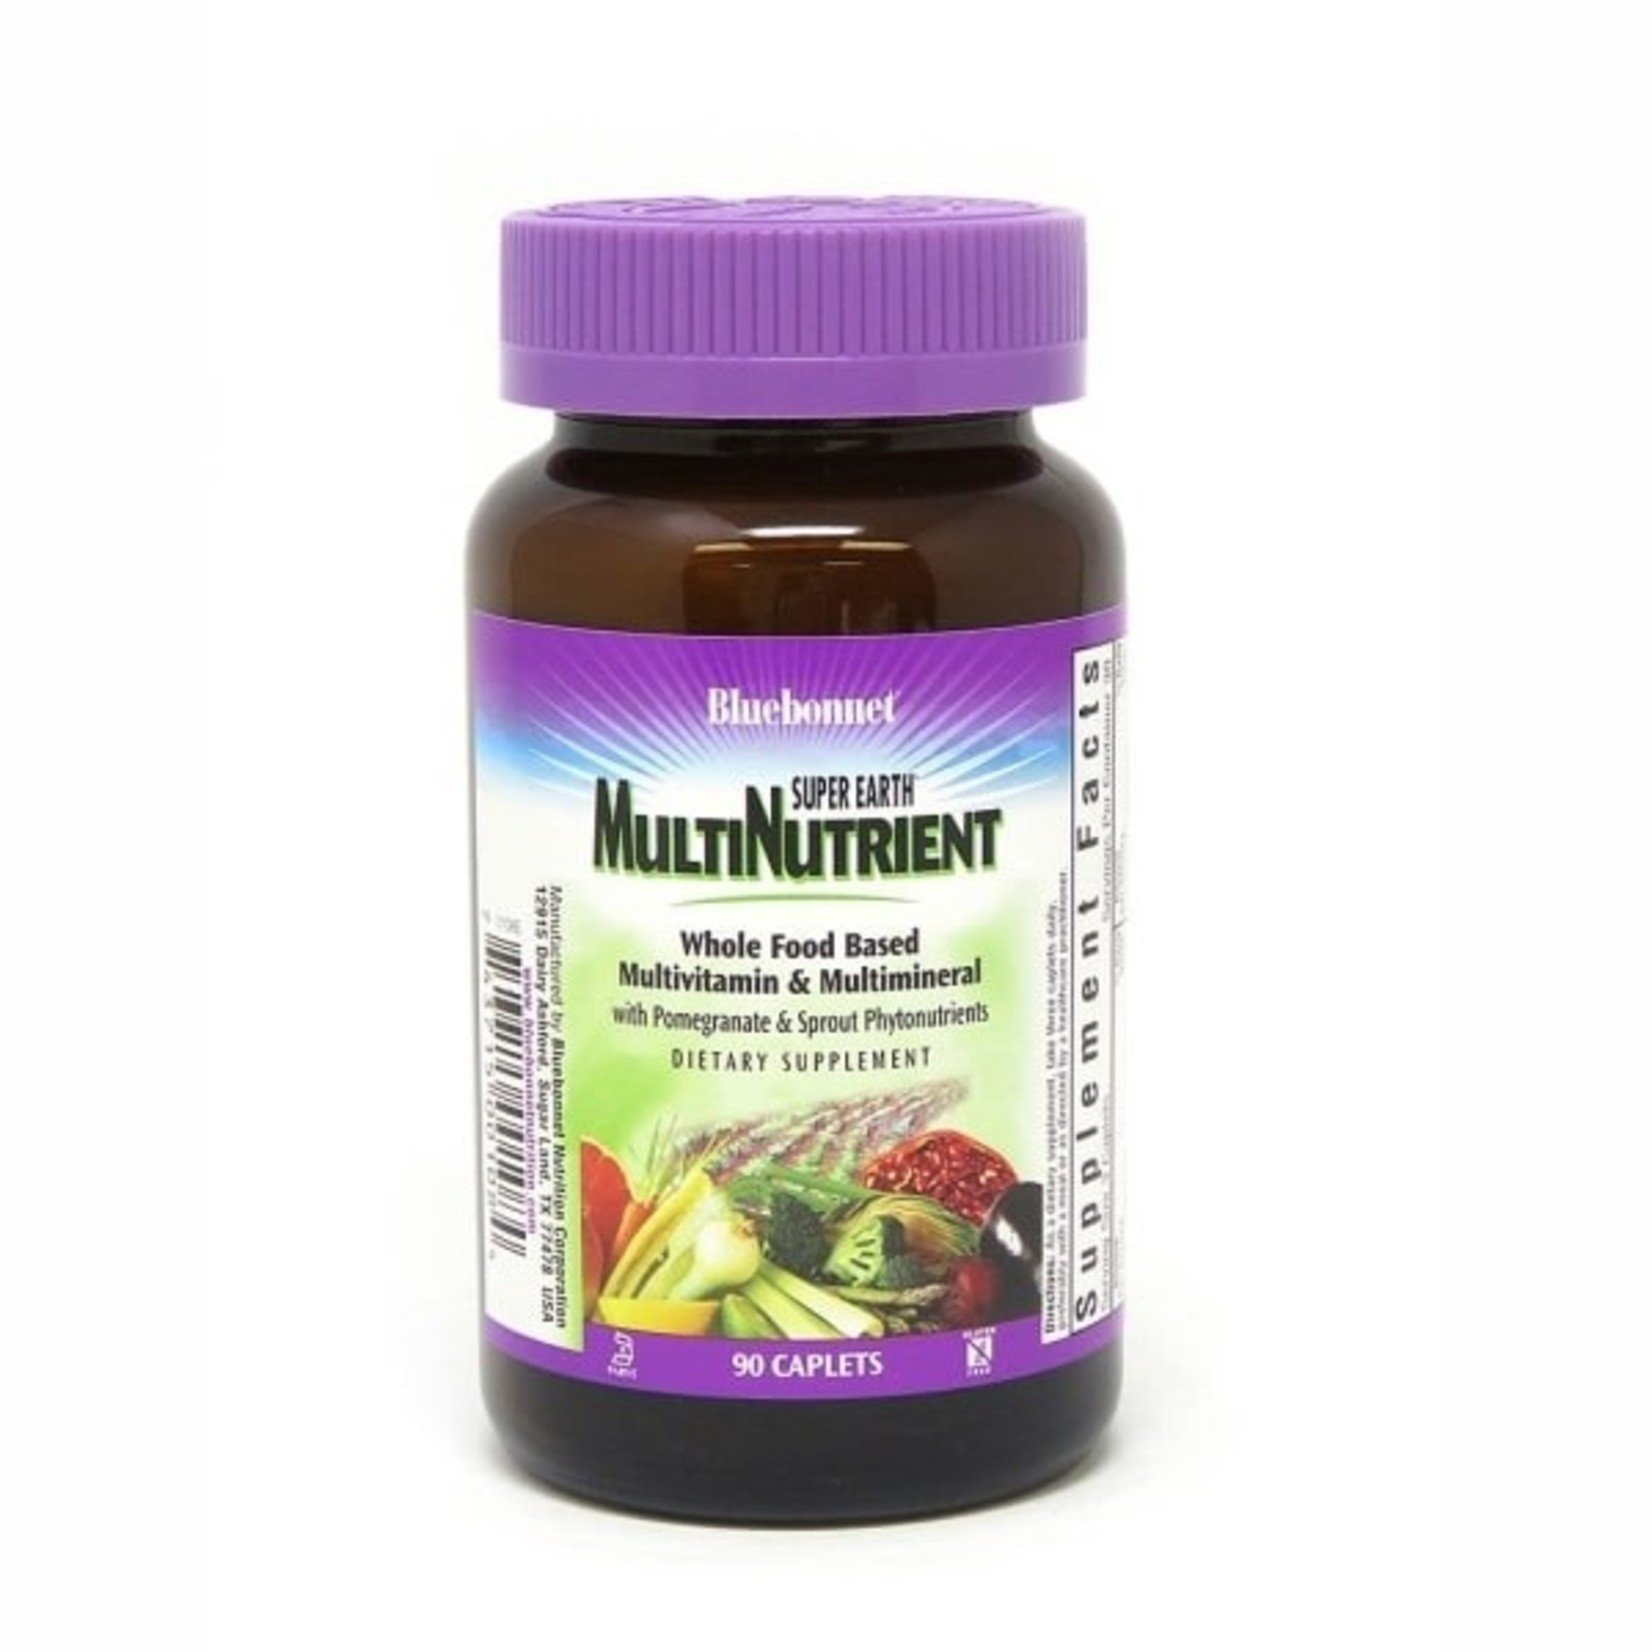 Bluebonnet Nutrition Bluebonnet Nutrition Super Earth MultiNutrient Formula (with Iron)